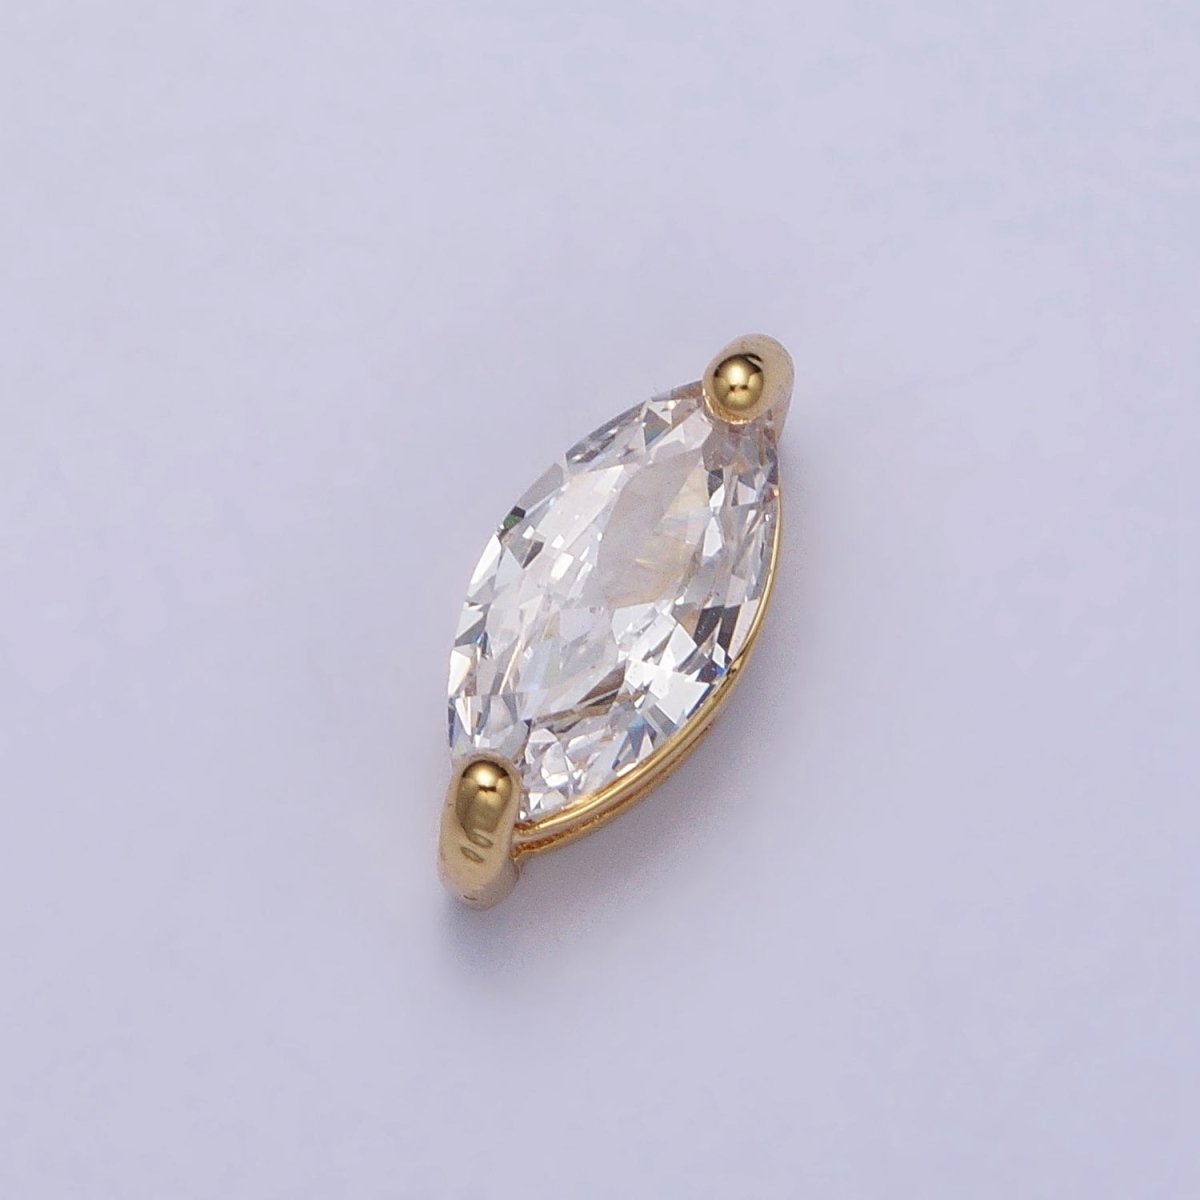 Mini Gold Filled Marquise Bead Spacer Connector 11.6 x 5.1mm for Bracelet Necklace B-816 B-817 - DLUXCA